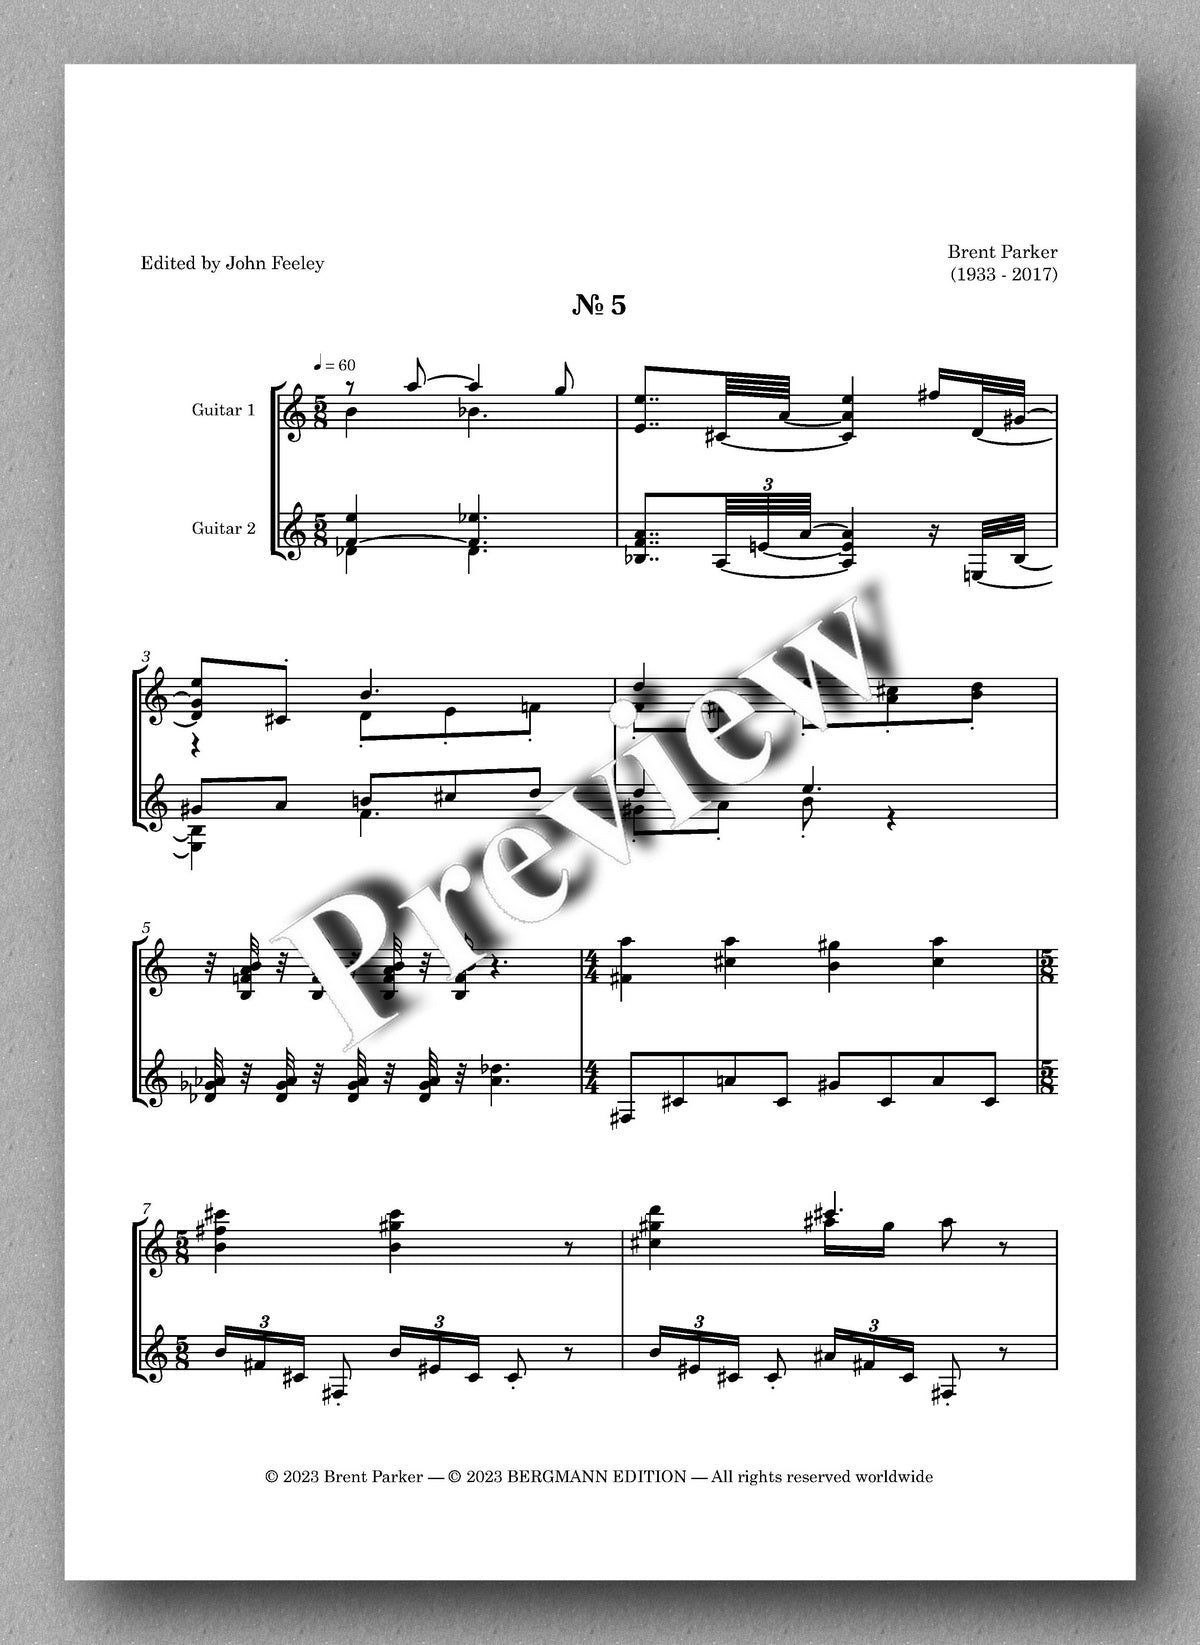 Five Spanish Pieces by Brent Parker - preview of the music score 5